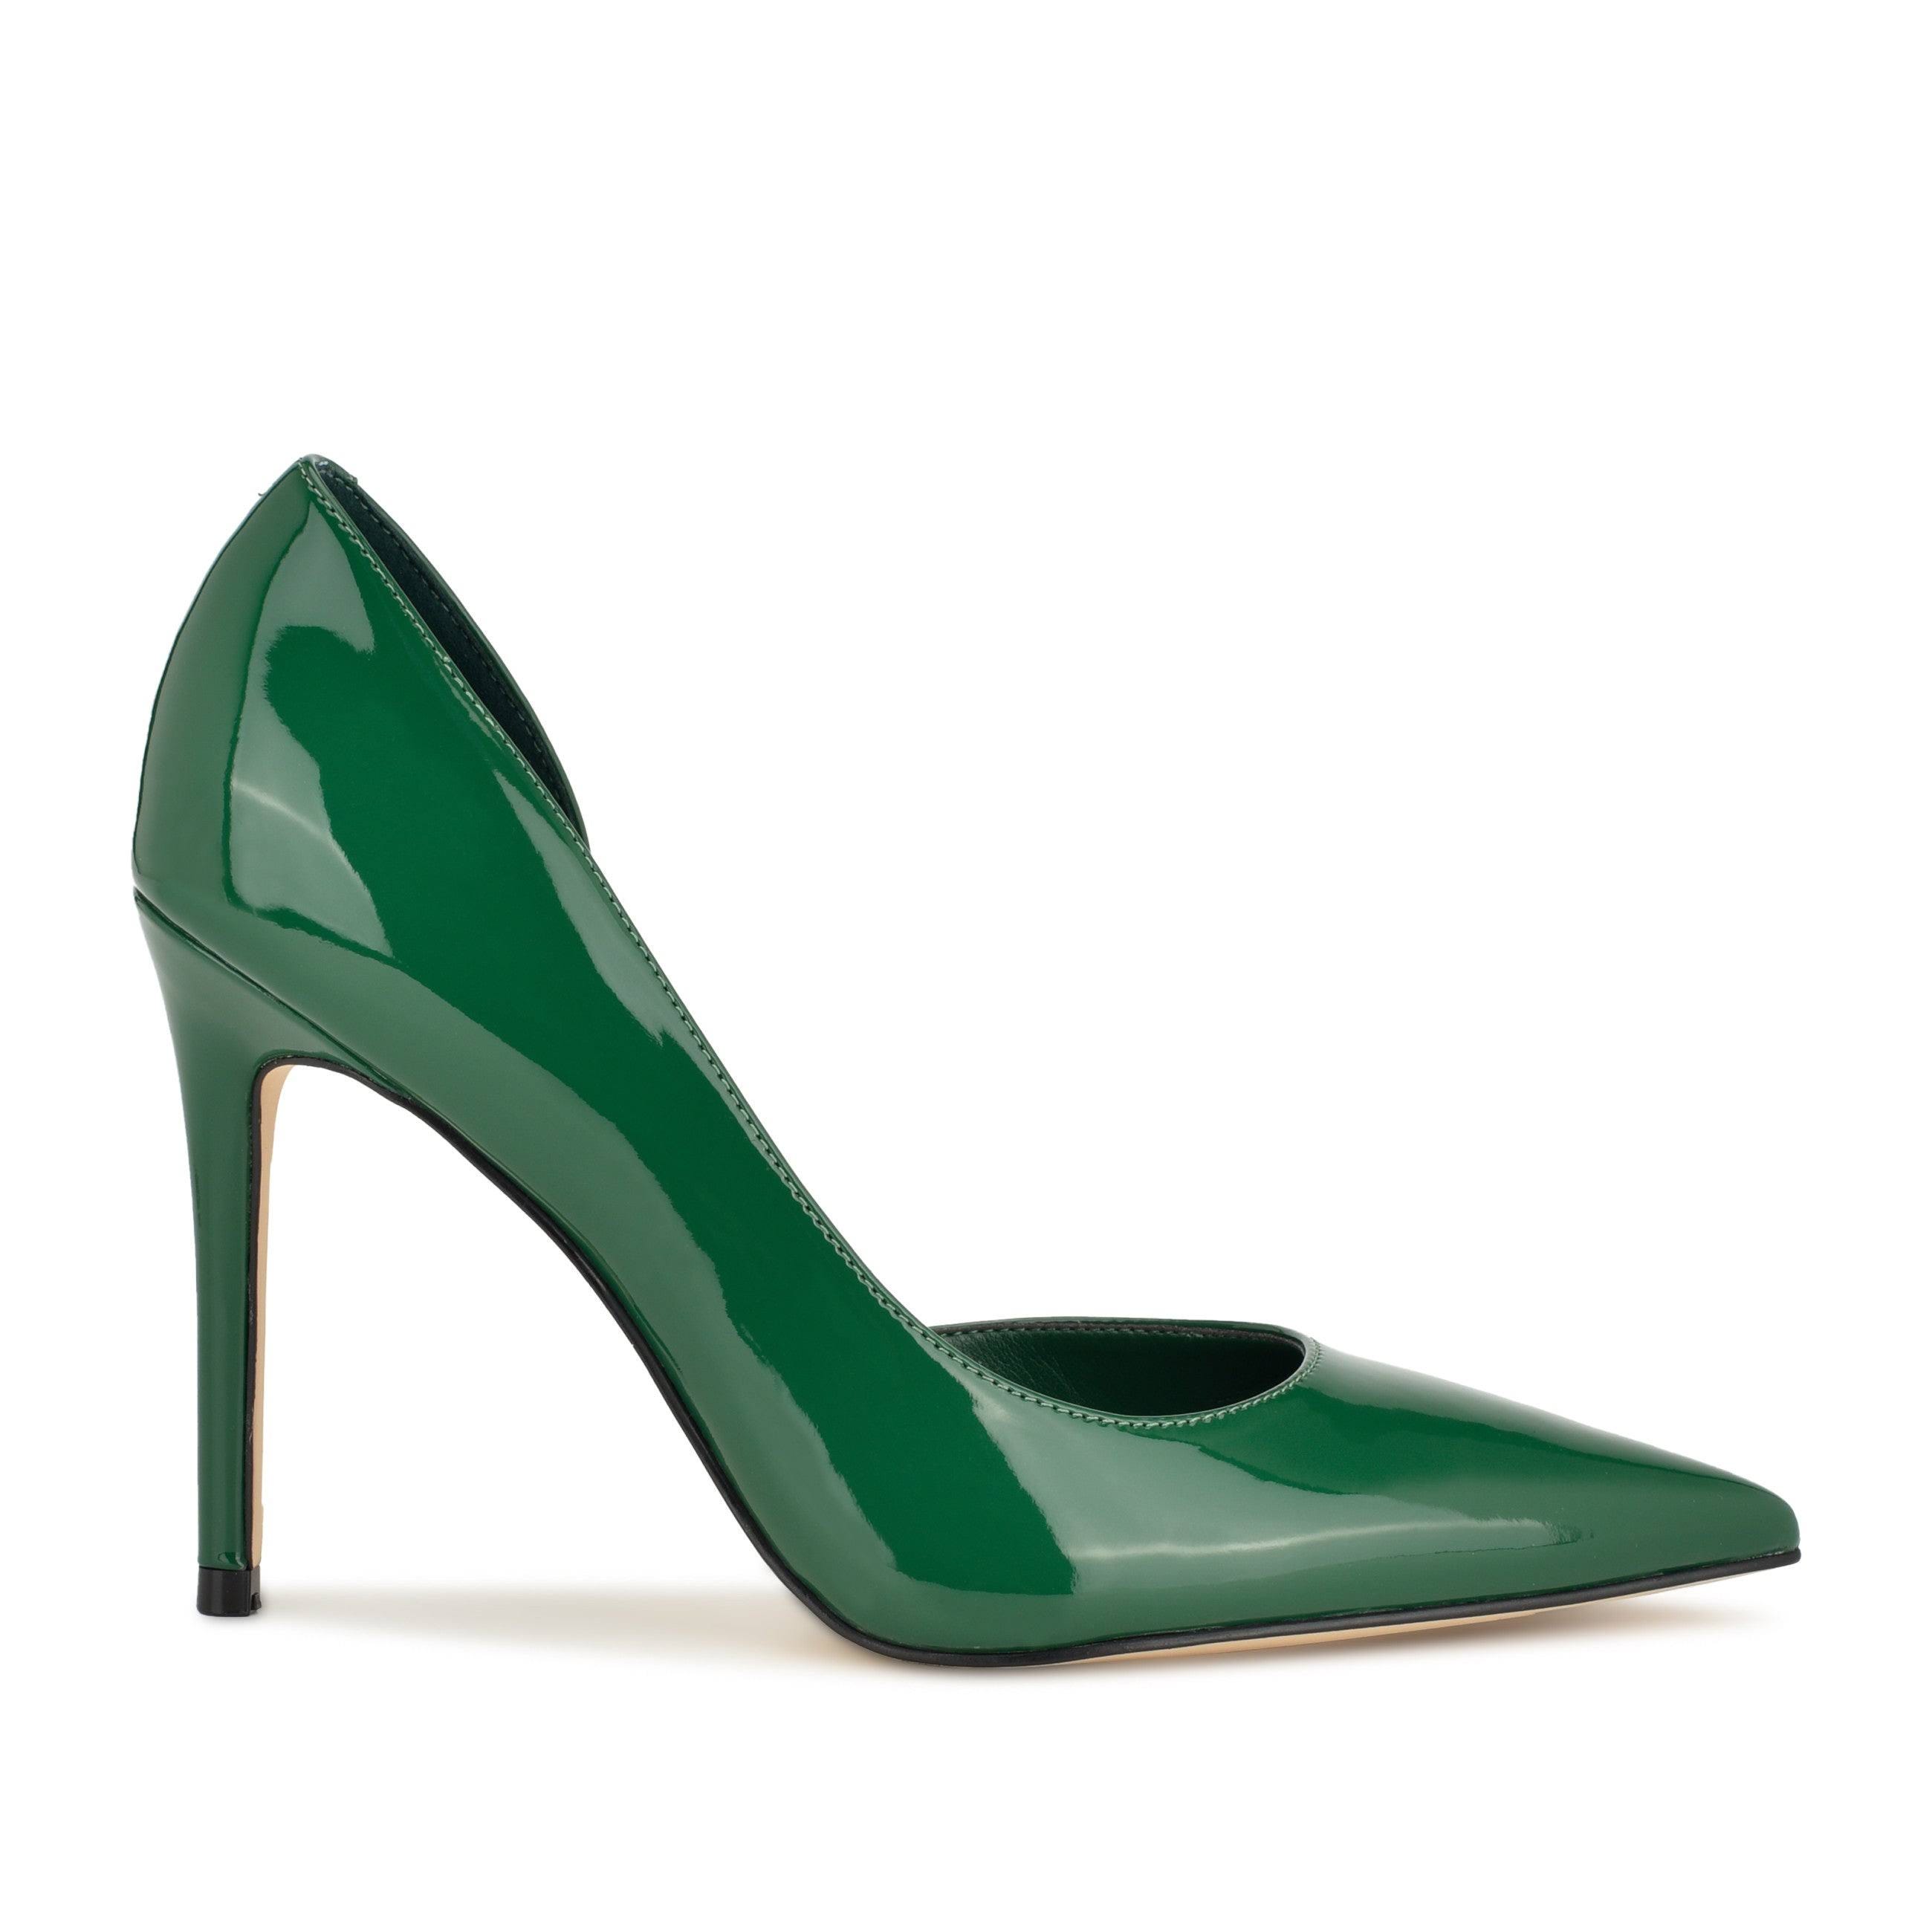 Pointy Toe Stiletto Pump Shoes by Nine West | Image